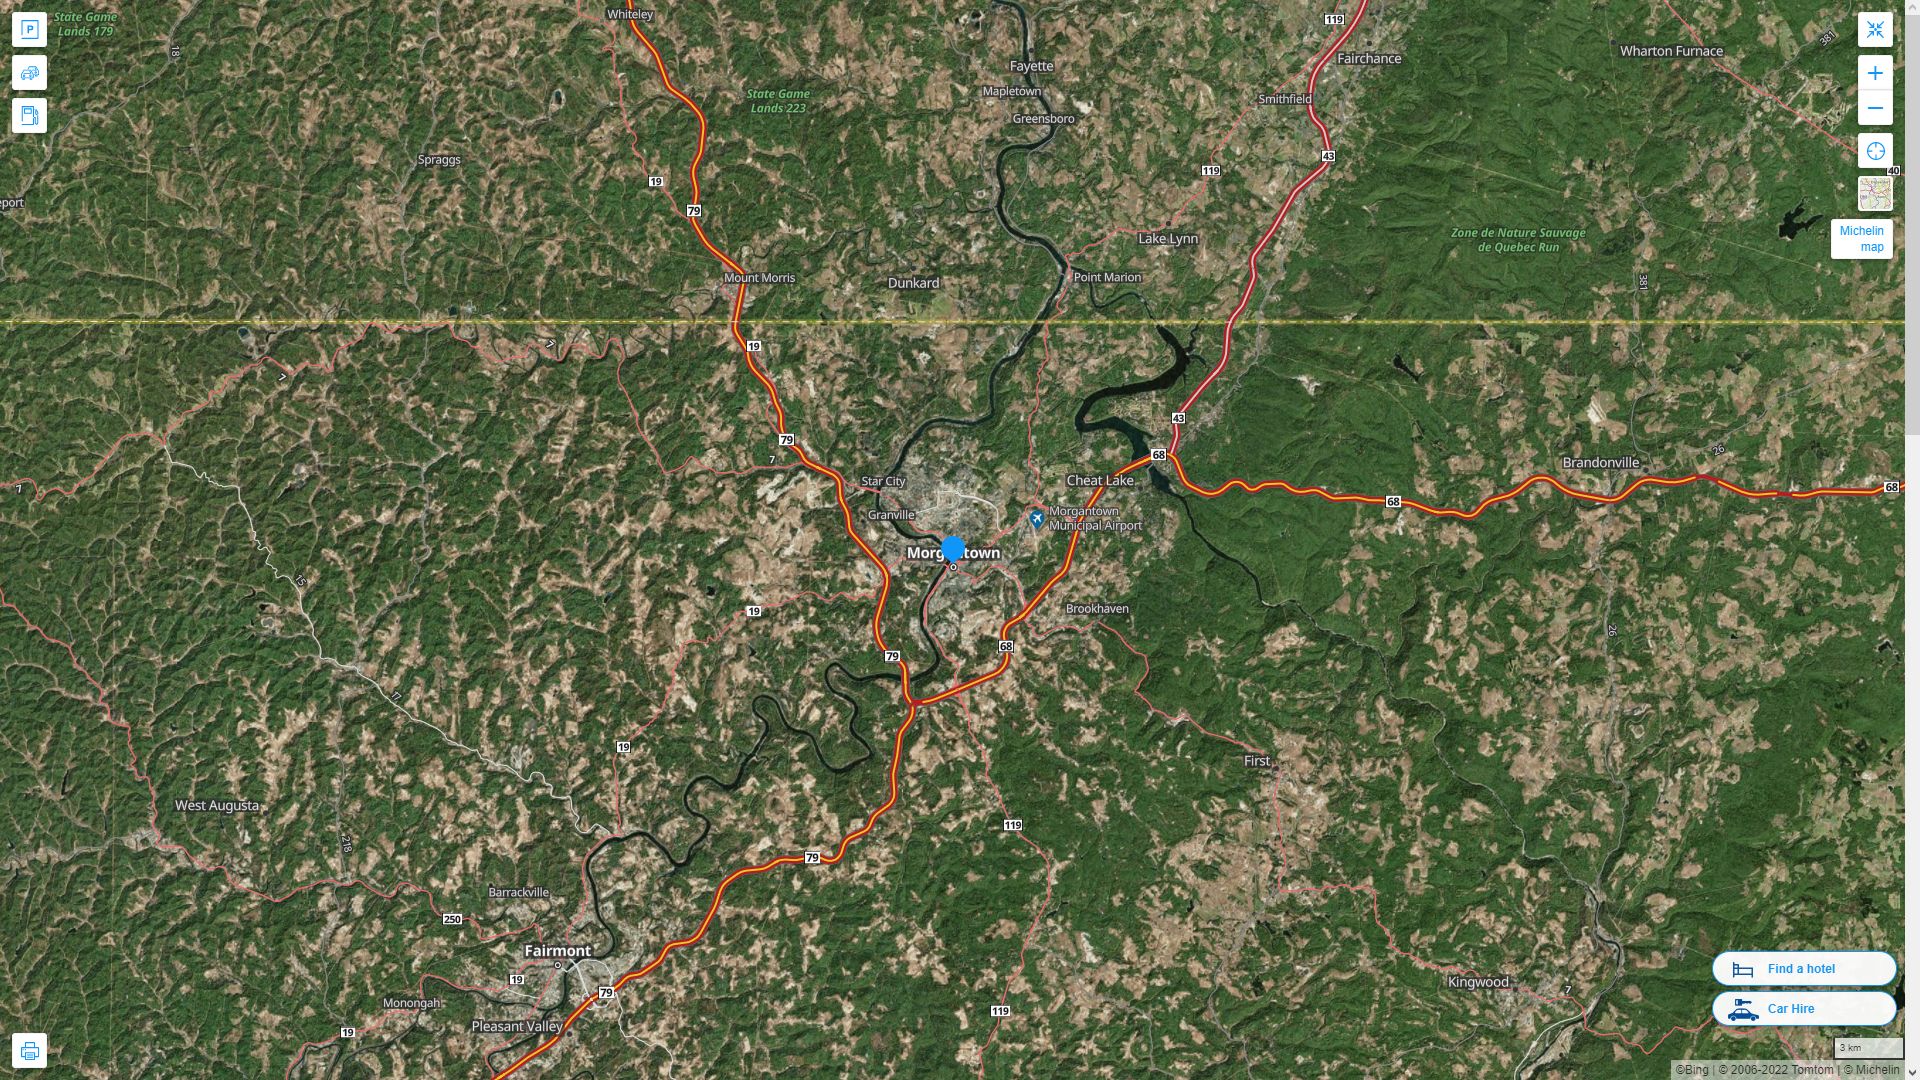 Morgantown West Virginia Highway and Road Map with Satellite View